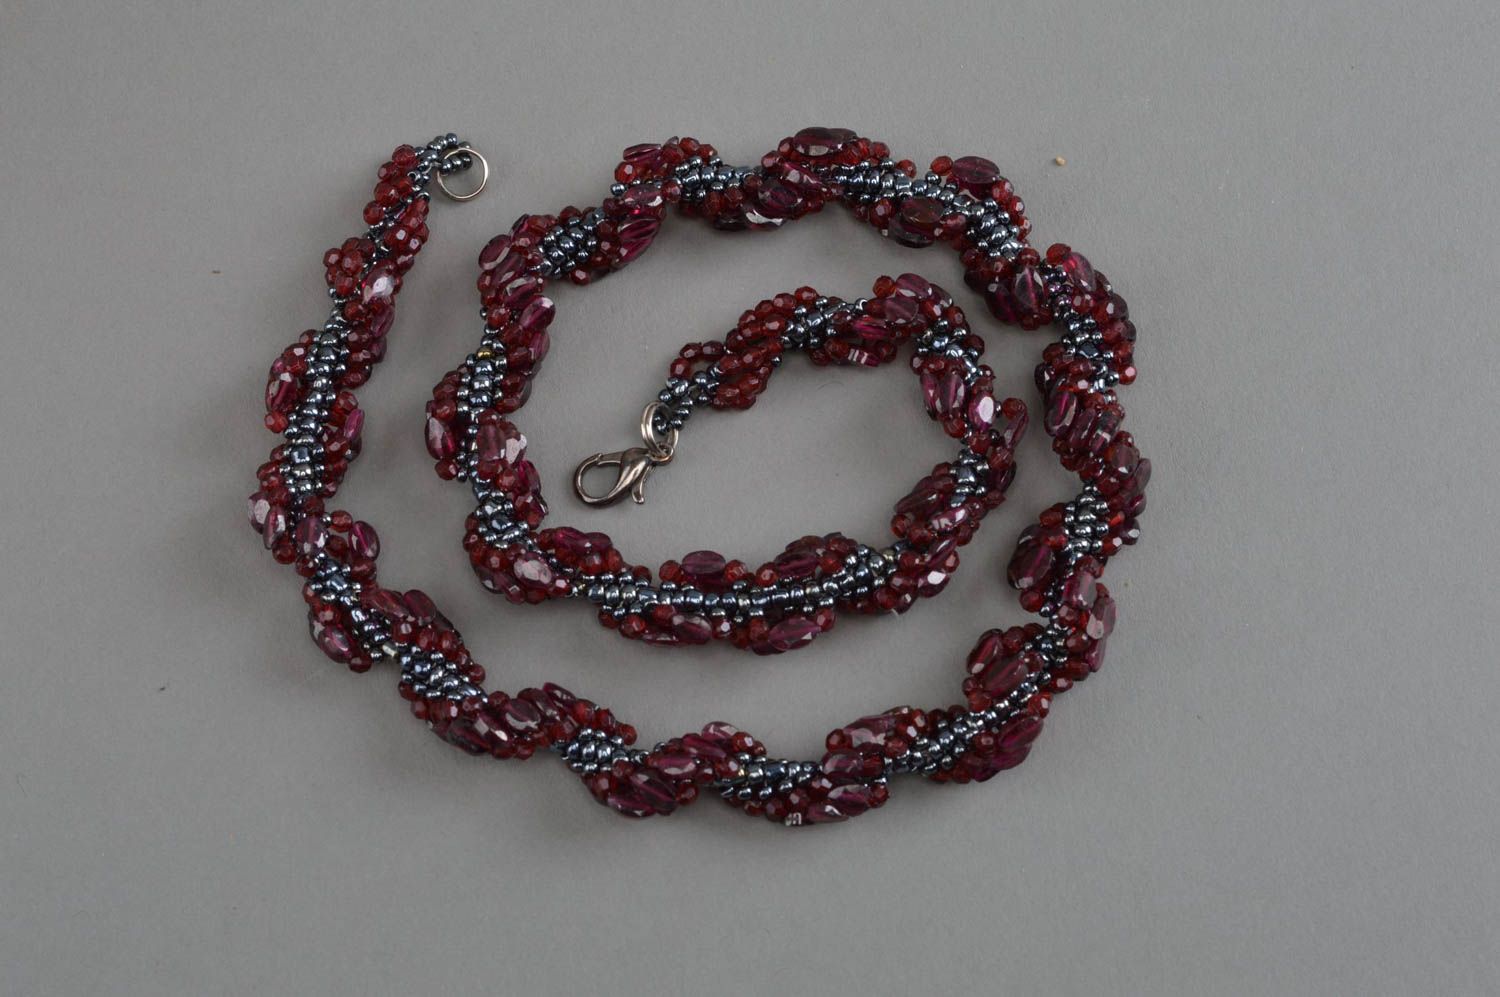 Handmade necklace with garnet beads jewelry with natural stones for women photo 3